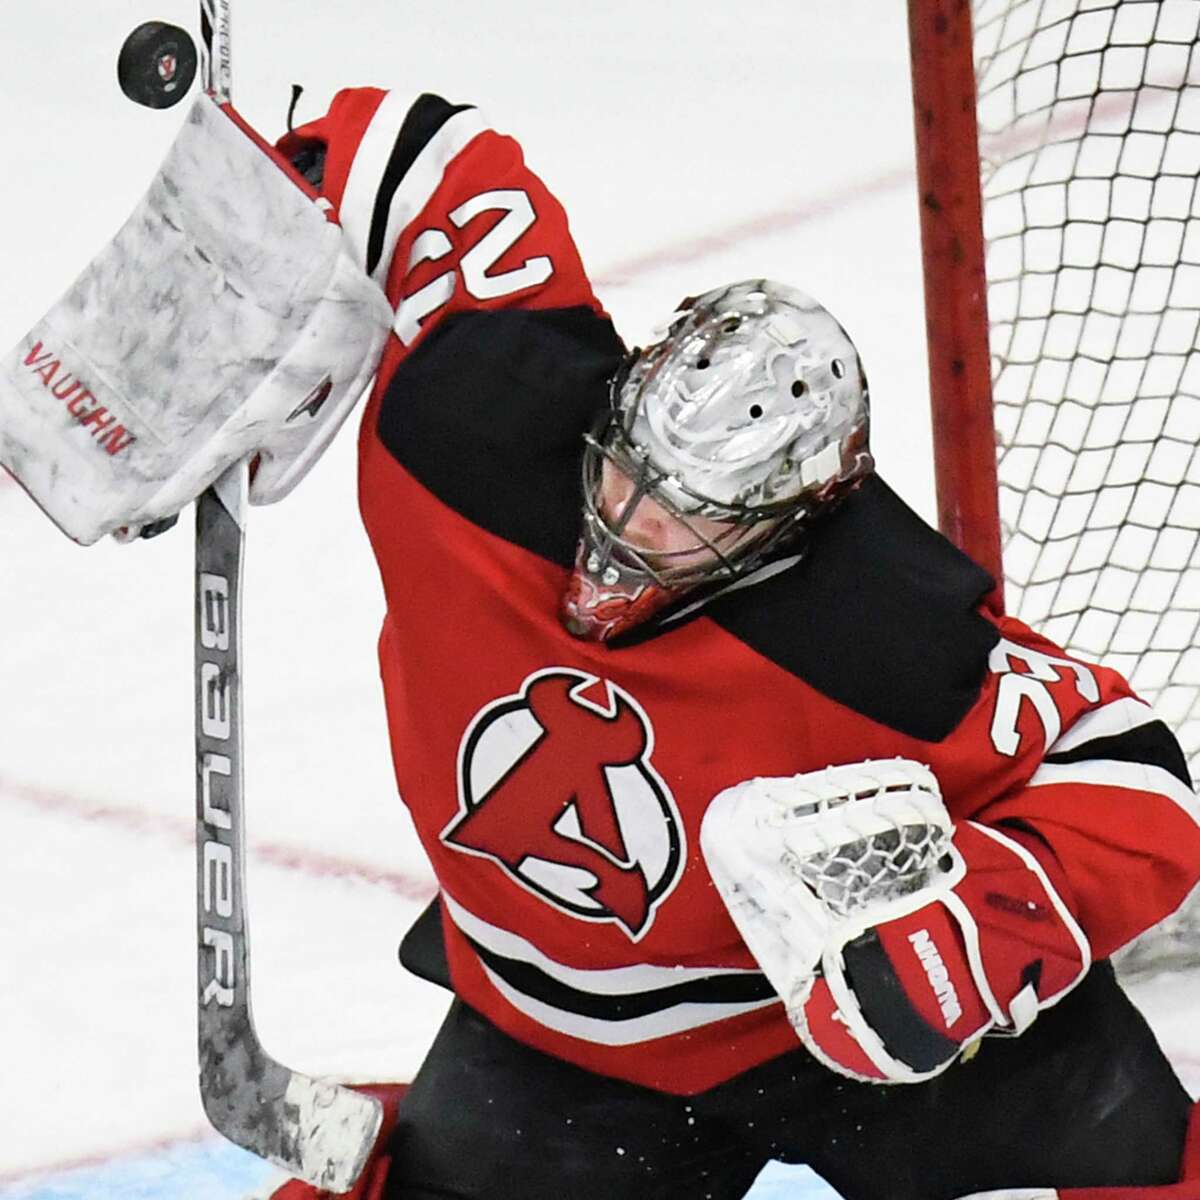 Albany Devils goalie #29 Mackenzie Blackwood stops a Utica Comets shot during Friday's game at the Times Union Center March 24, 2017 in Albany, NY. (John Carl D'Annibale / Times Union)